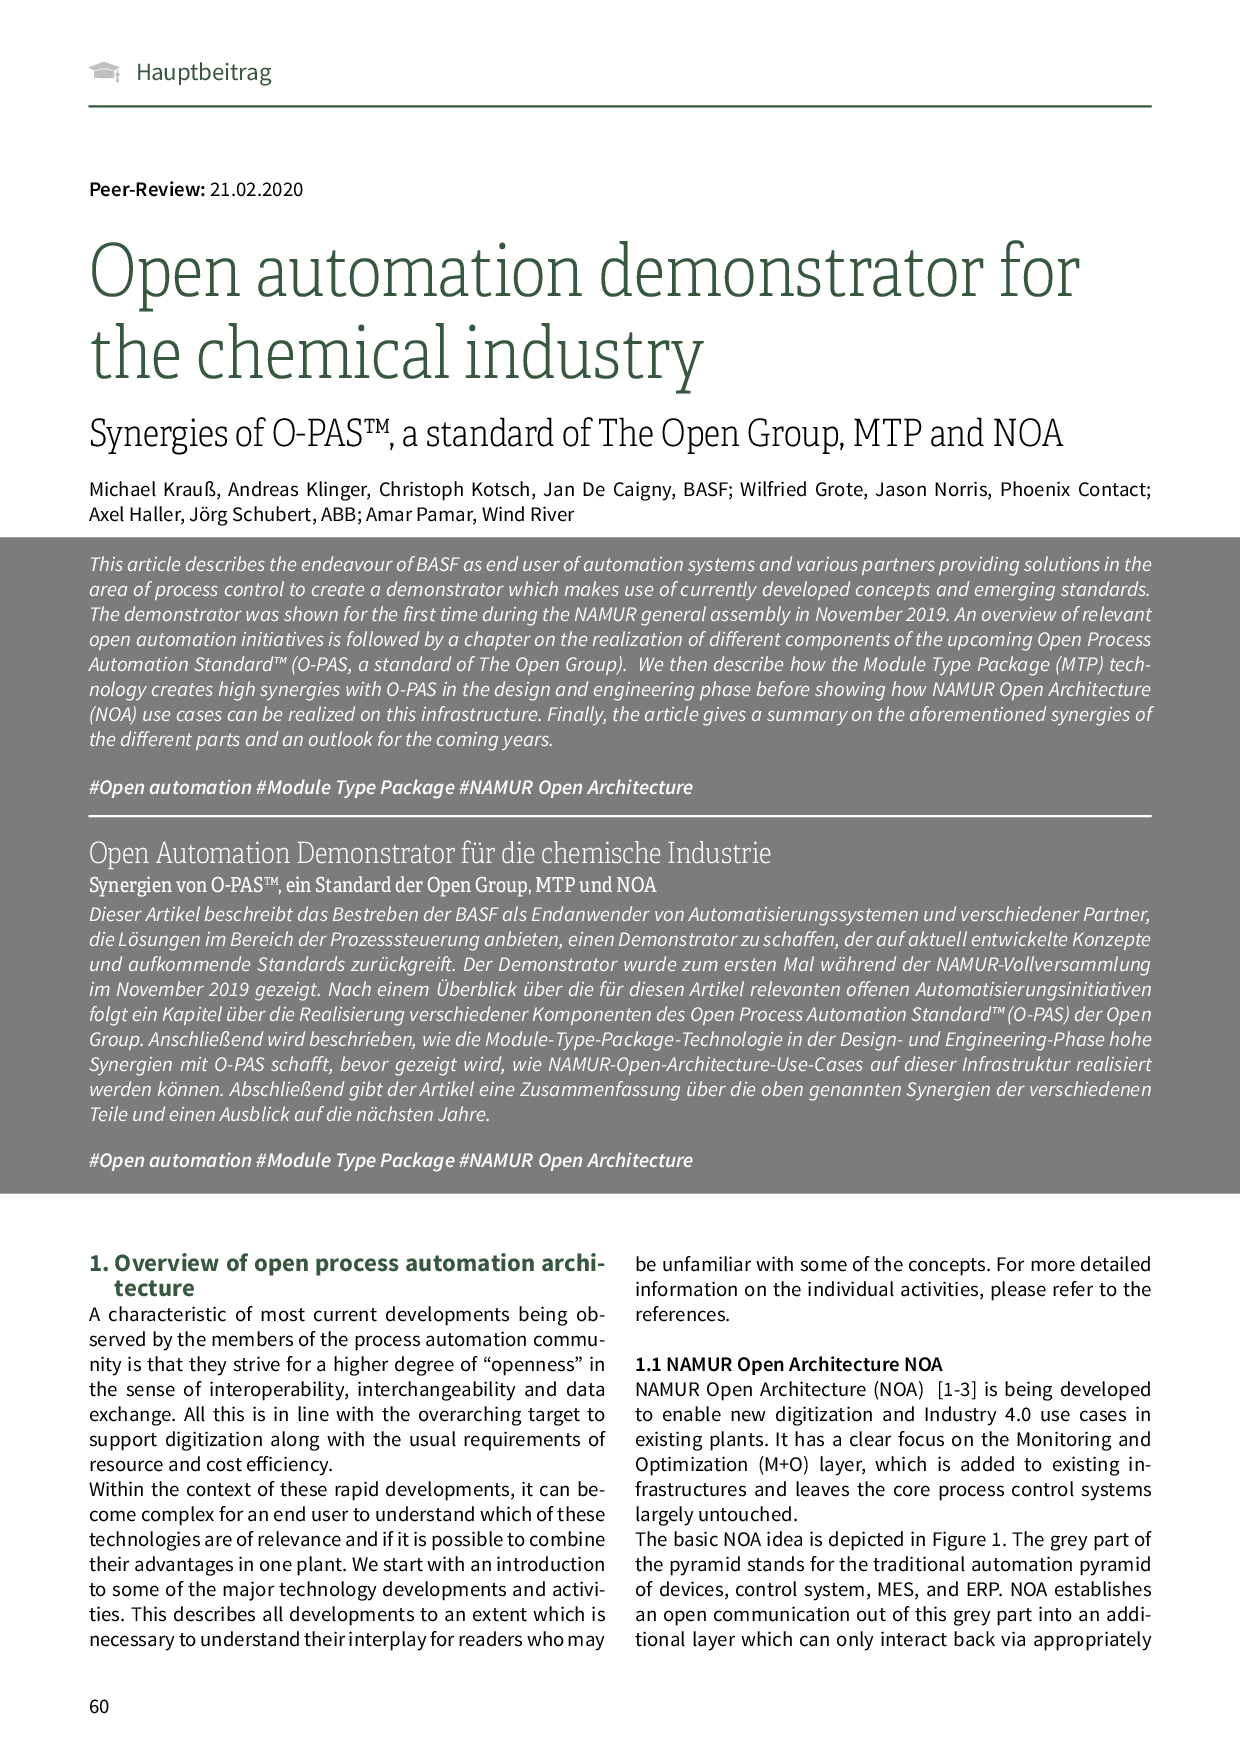 Open automation demonstrator for the chemical industry